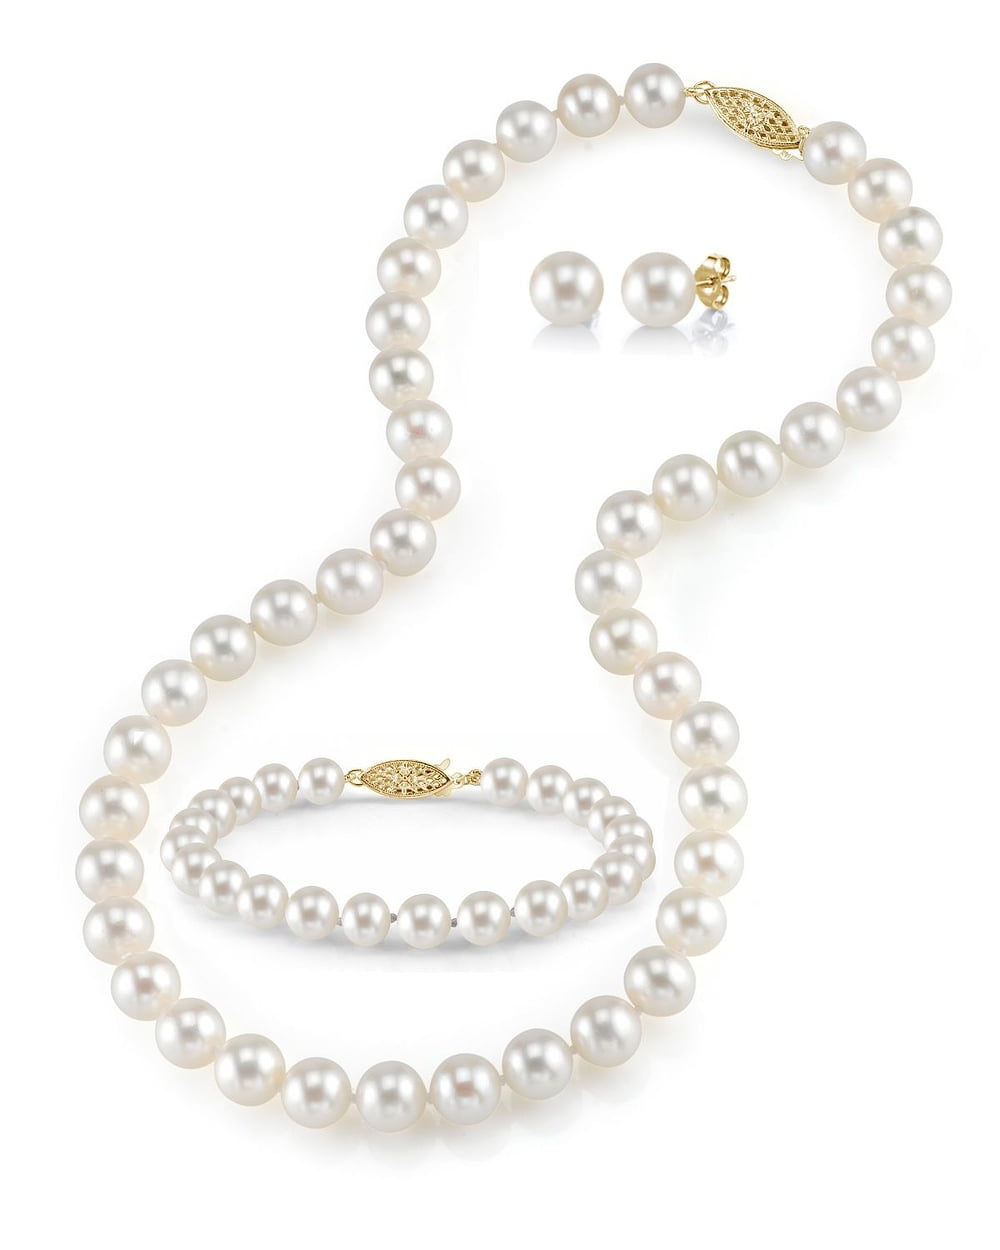 AAA 8mm White Akoya Shell Pearl Necklace Earring Set 18" 